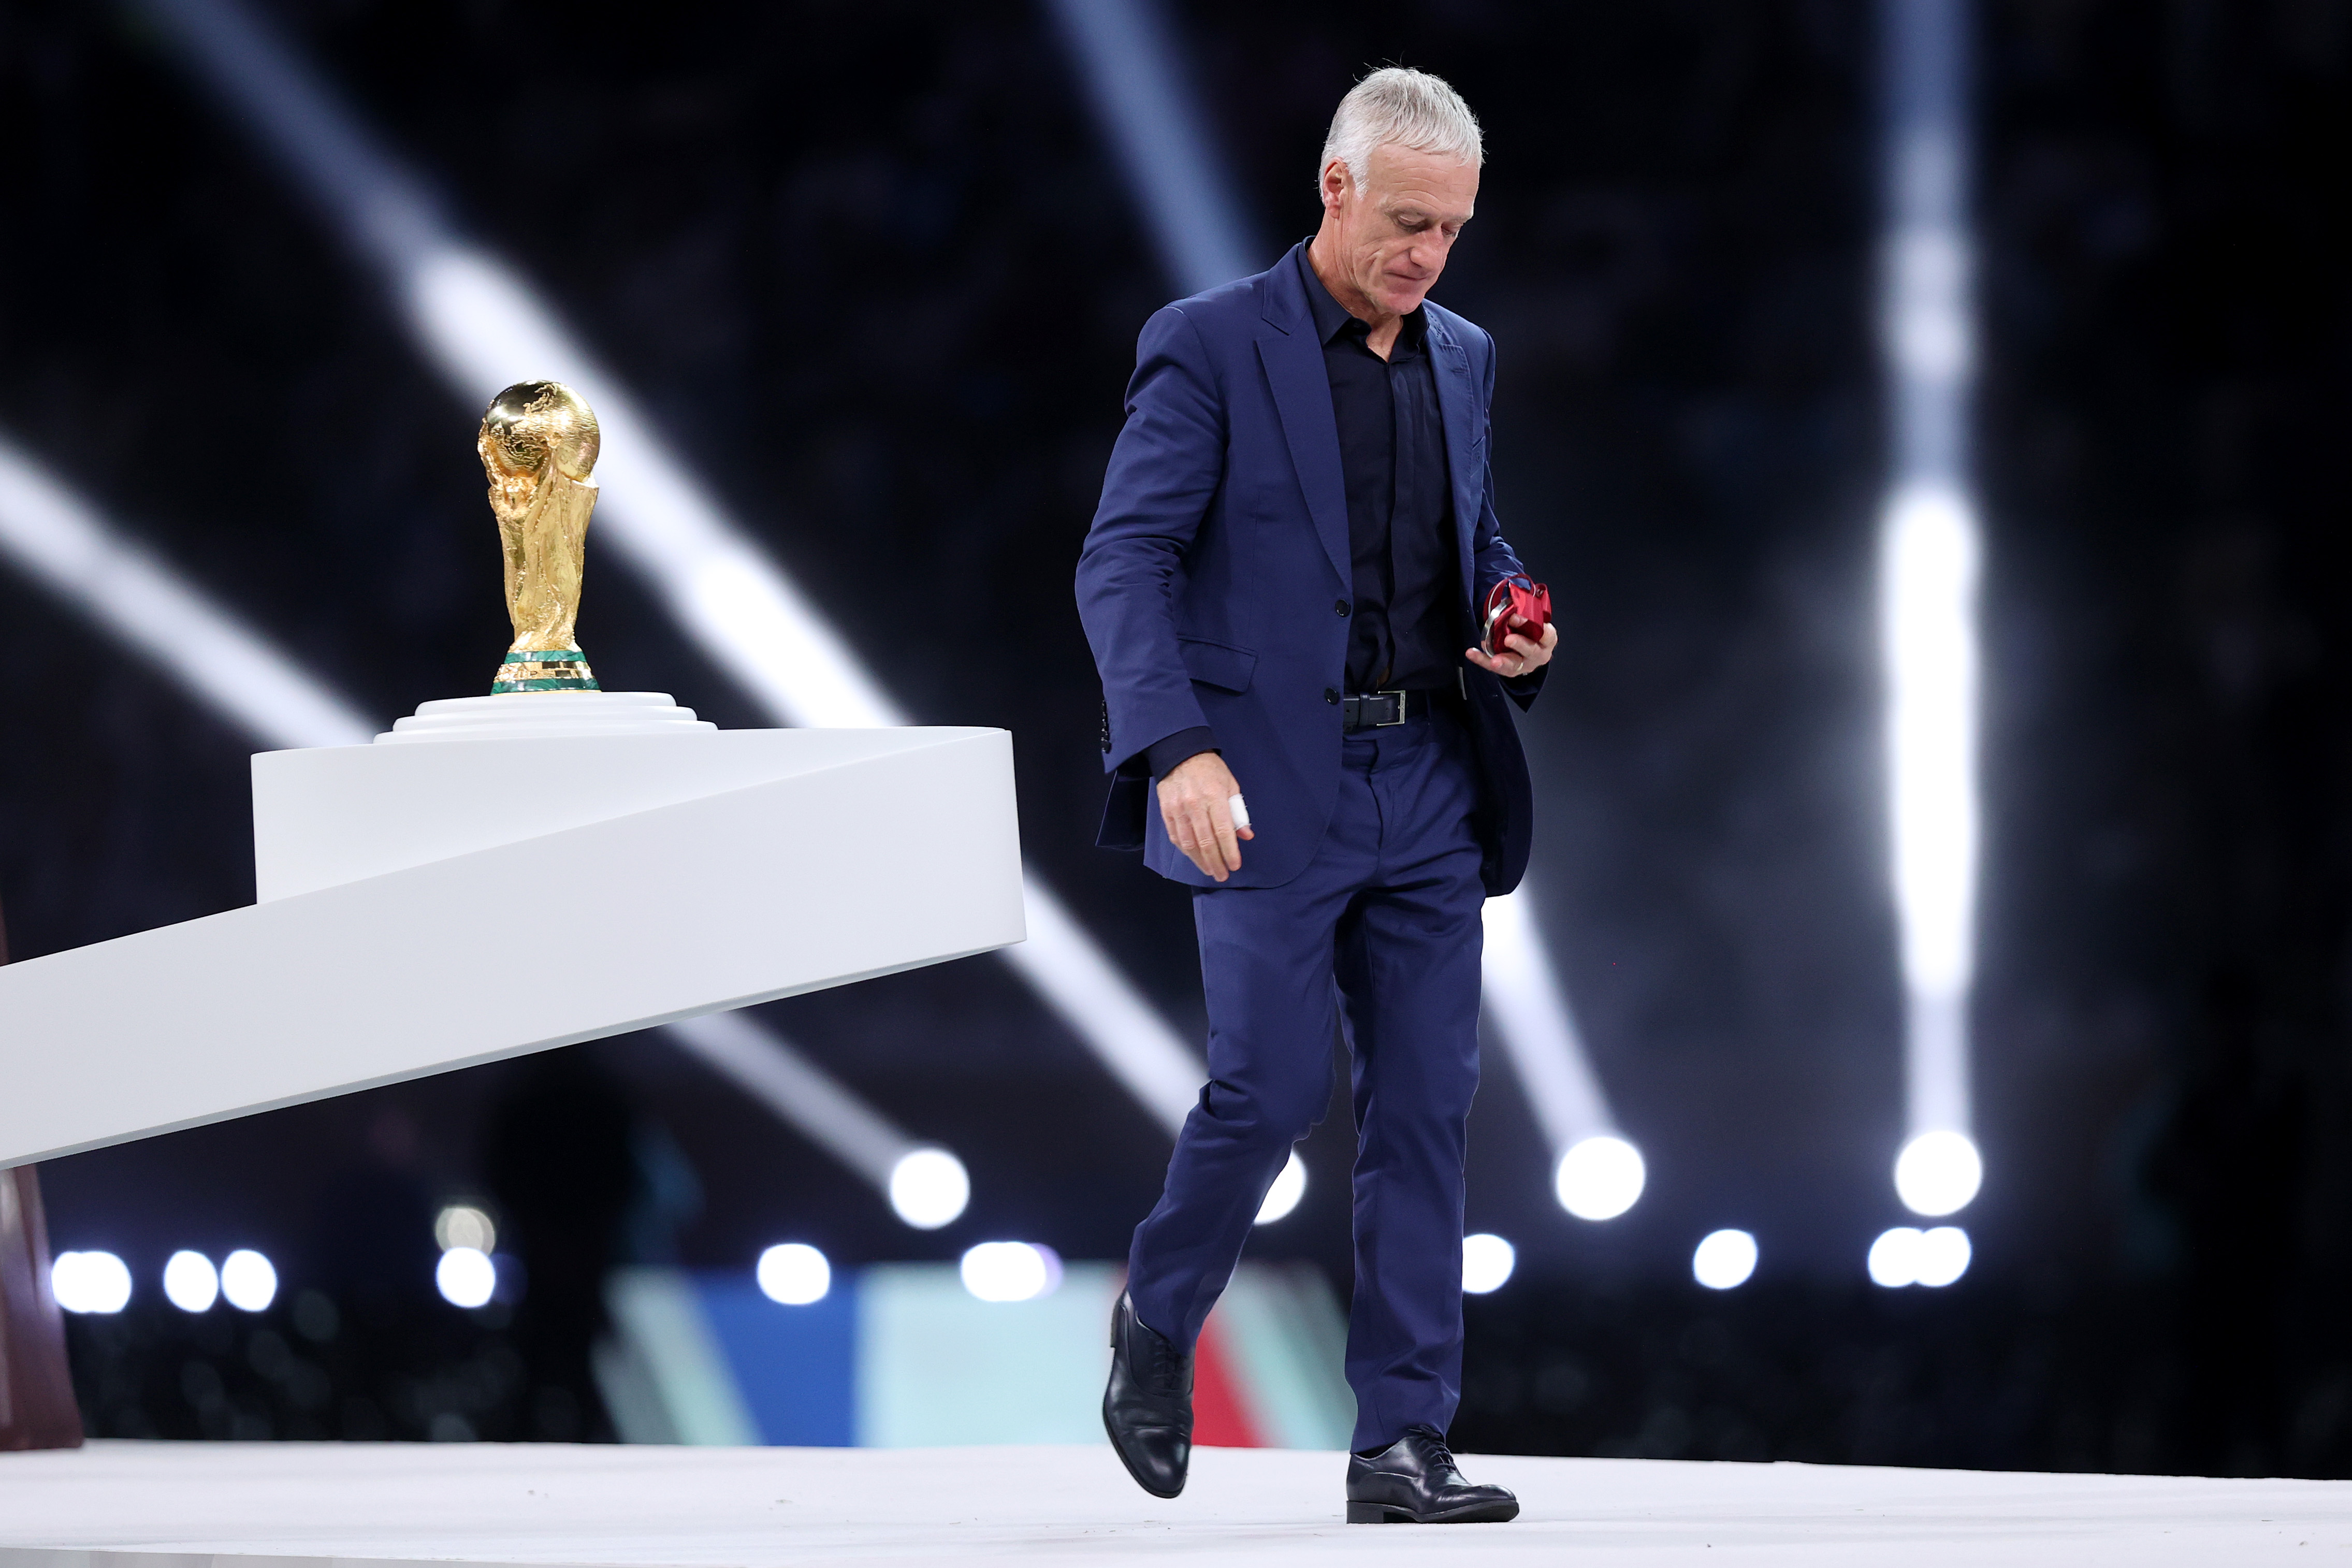 French coach Didier Deschamps receives his second medal after losing in the 2022 World Cup final to Argentina in Qatar.